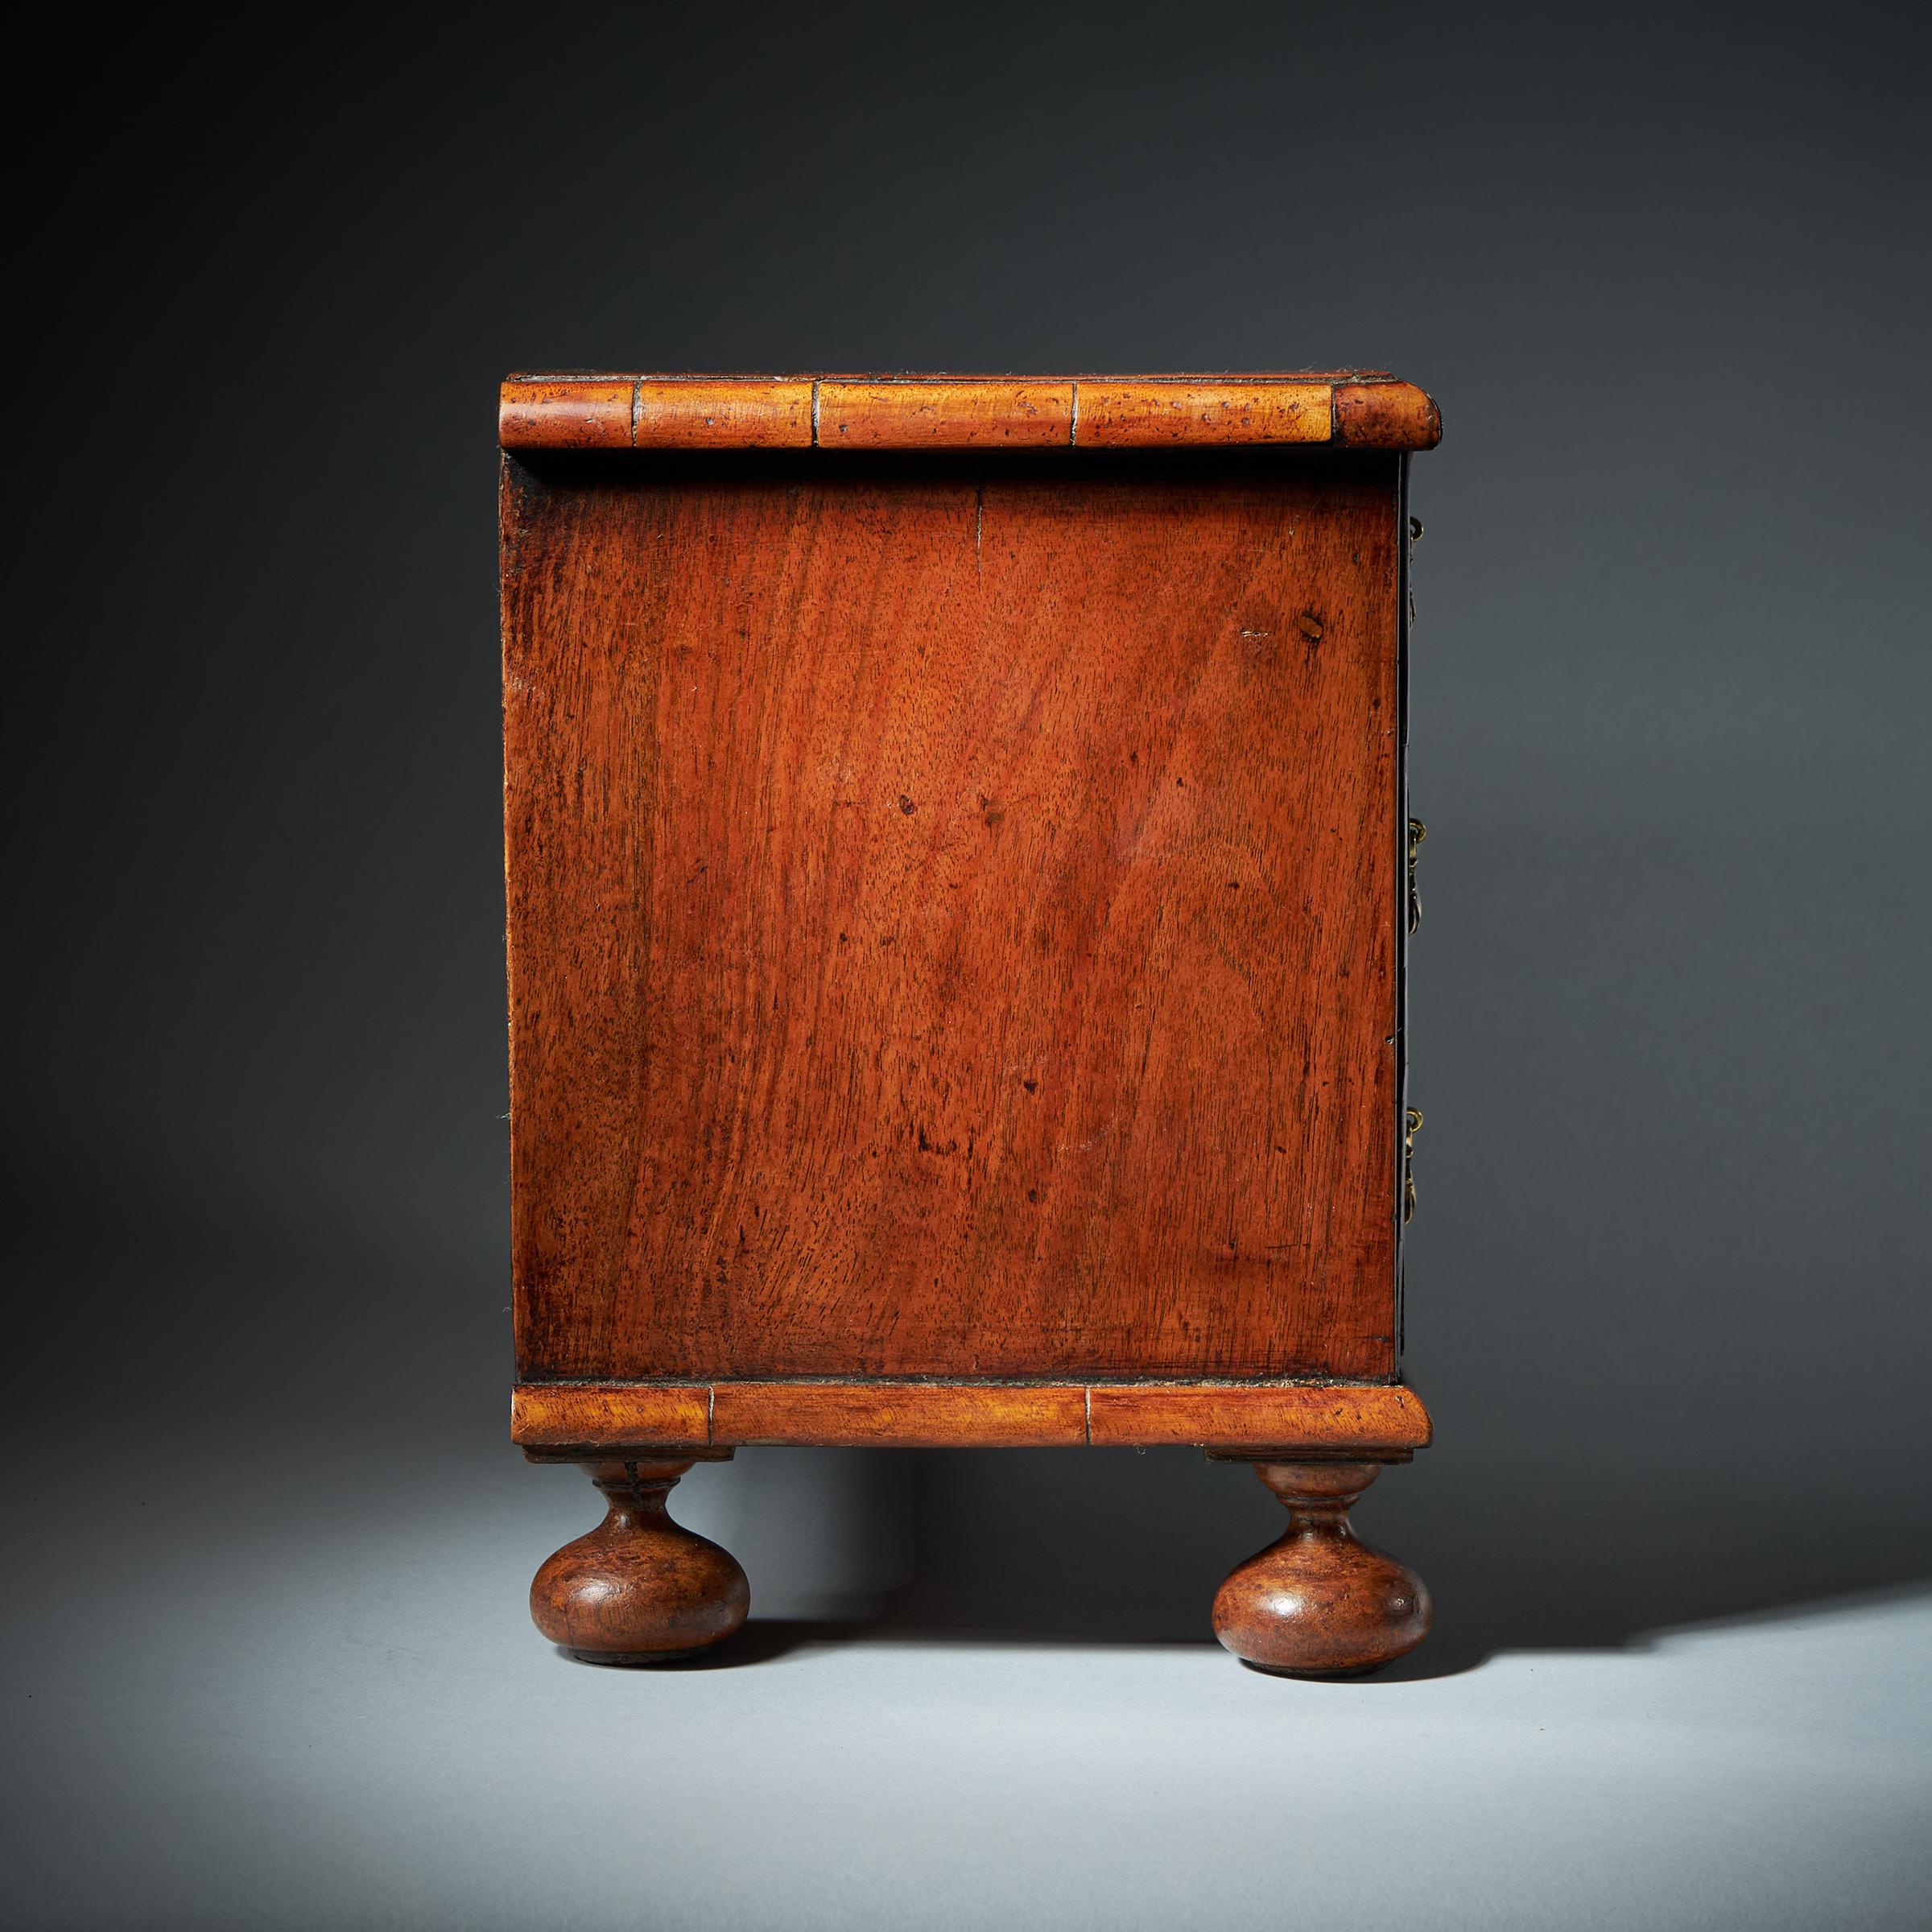 English Rare 17th Century Miniature William and Mary Walnut Table Top Chest, circa 1690 For Sale